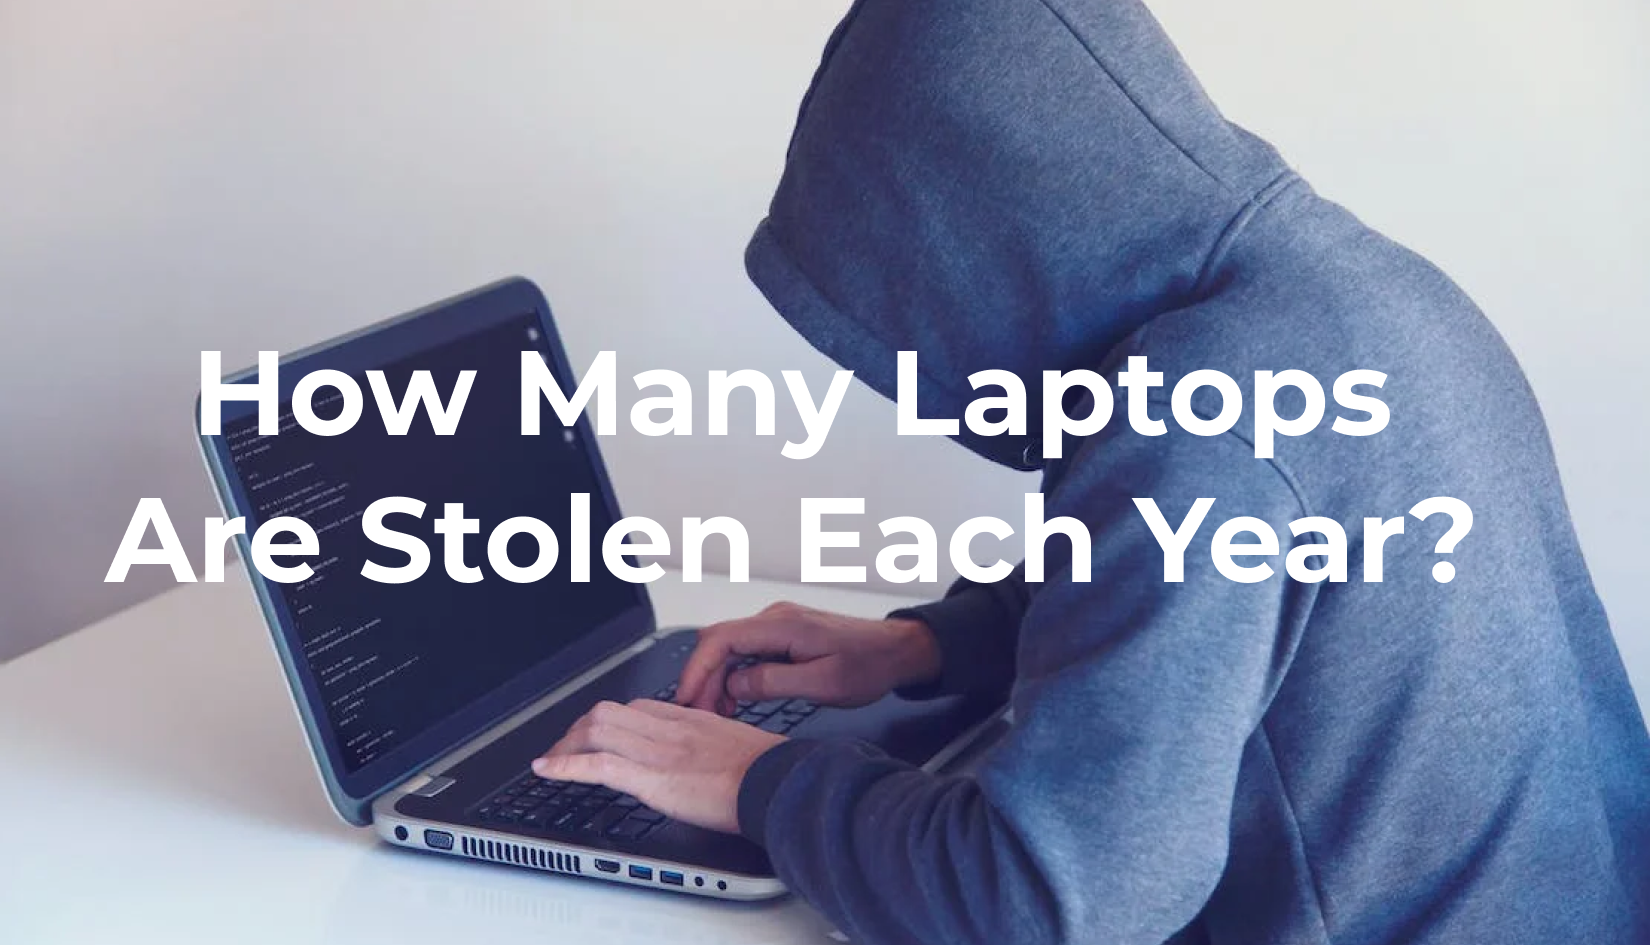 How Many Laptops Are Stolen Each Year?